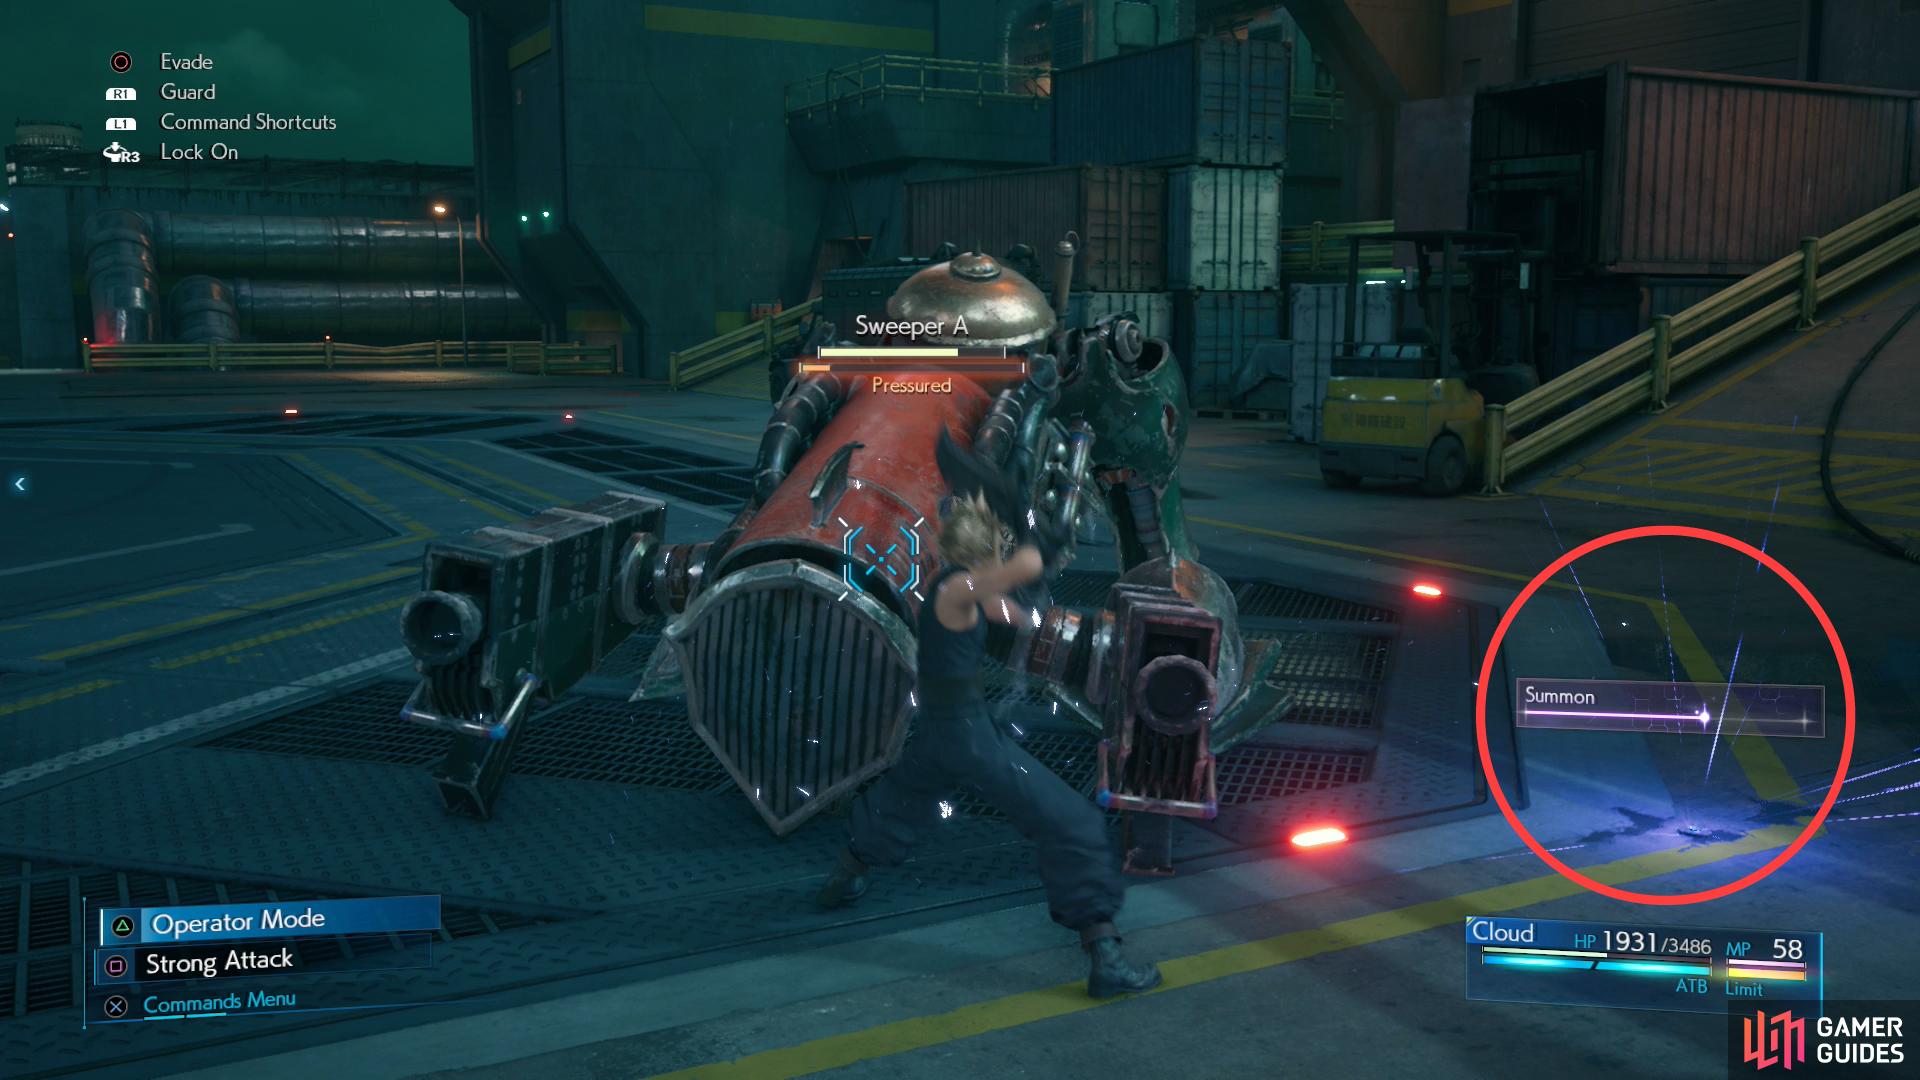 Final Fantasy 7 Remake Intergrade Trophies List Now Out, Adds 9